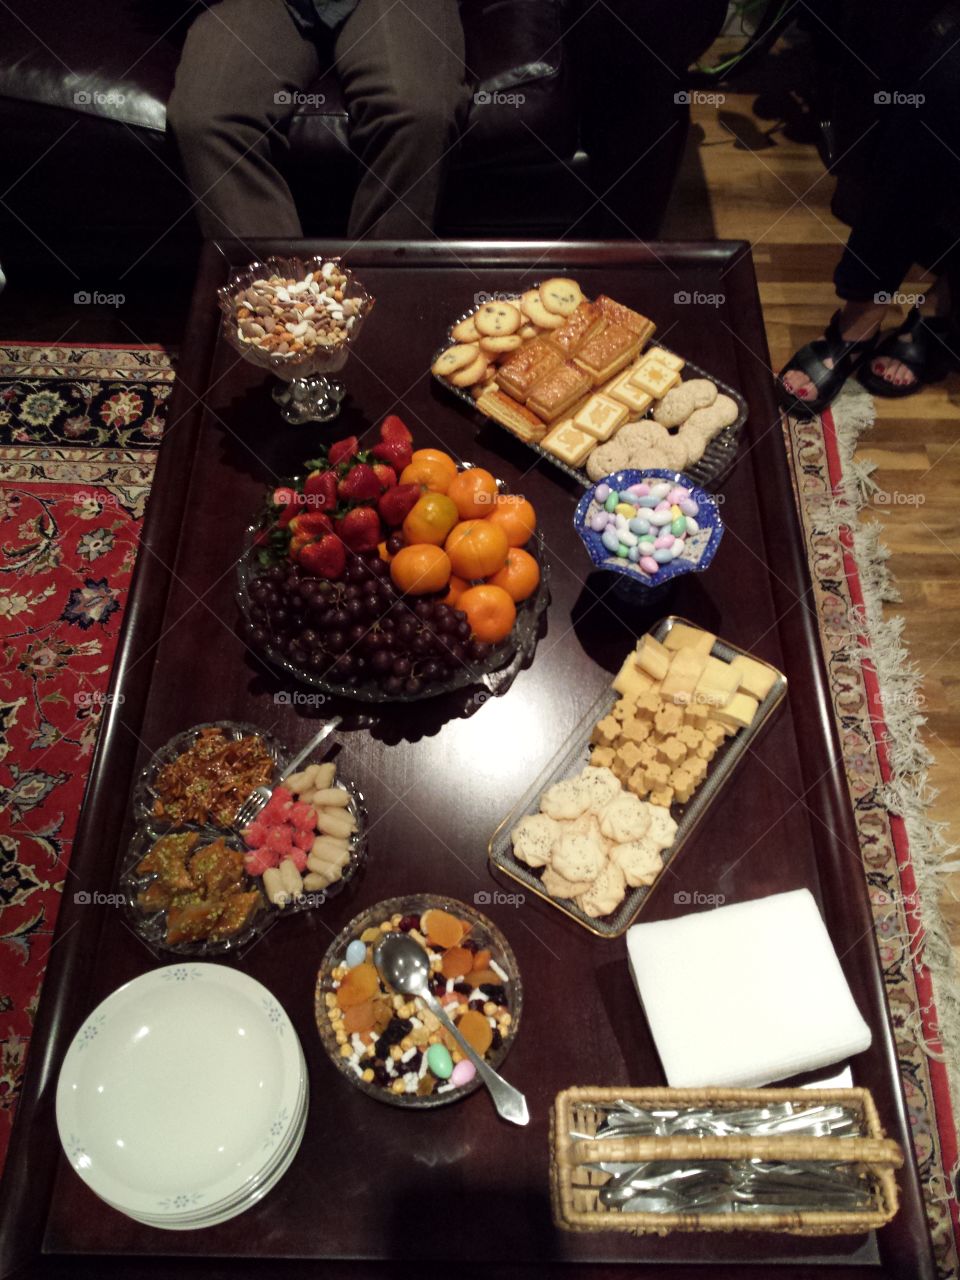 A fruit and dessert table from an Iranian get together